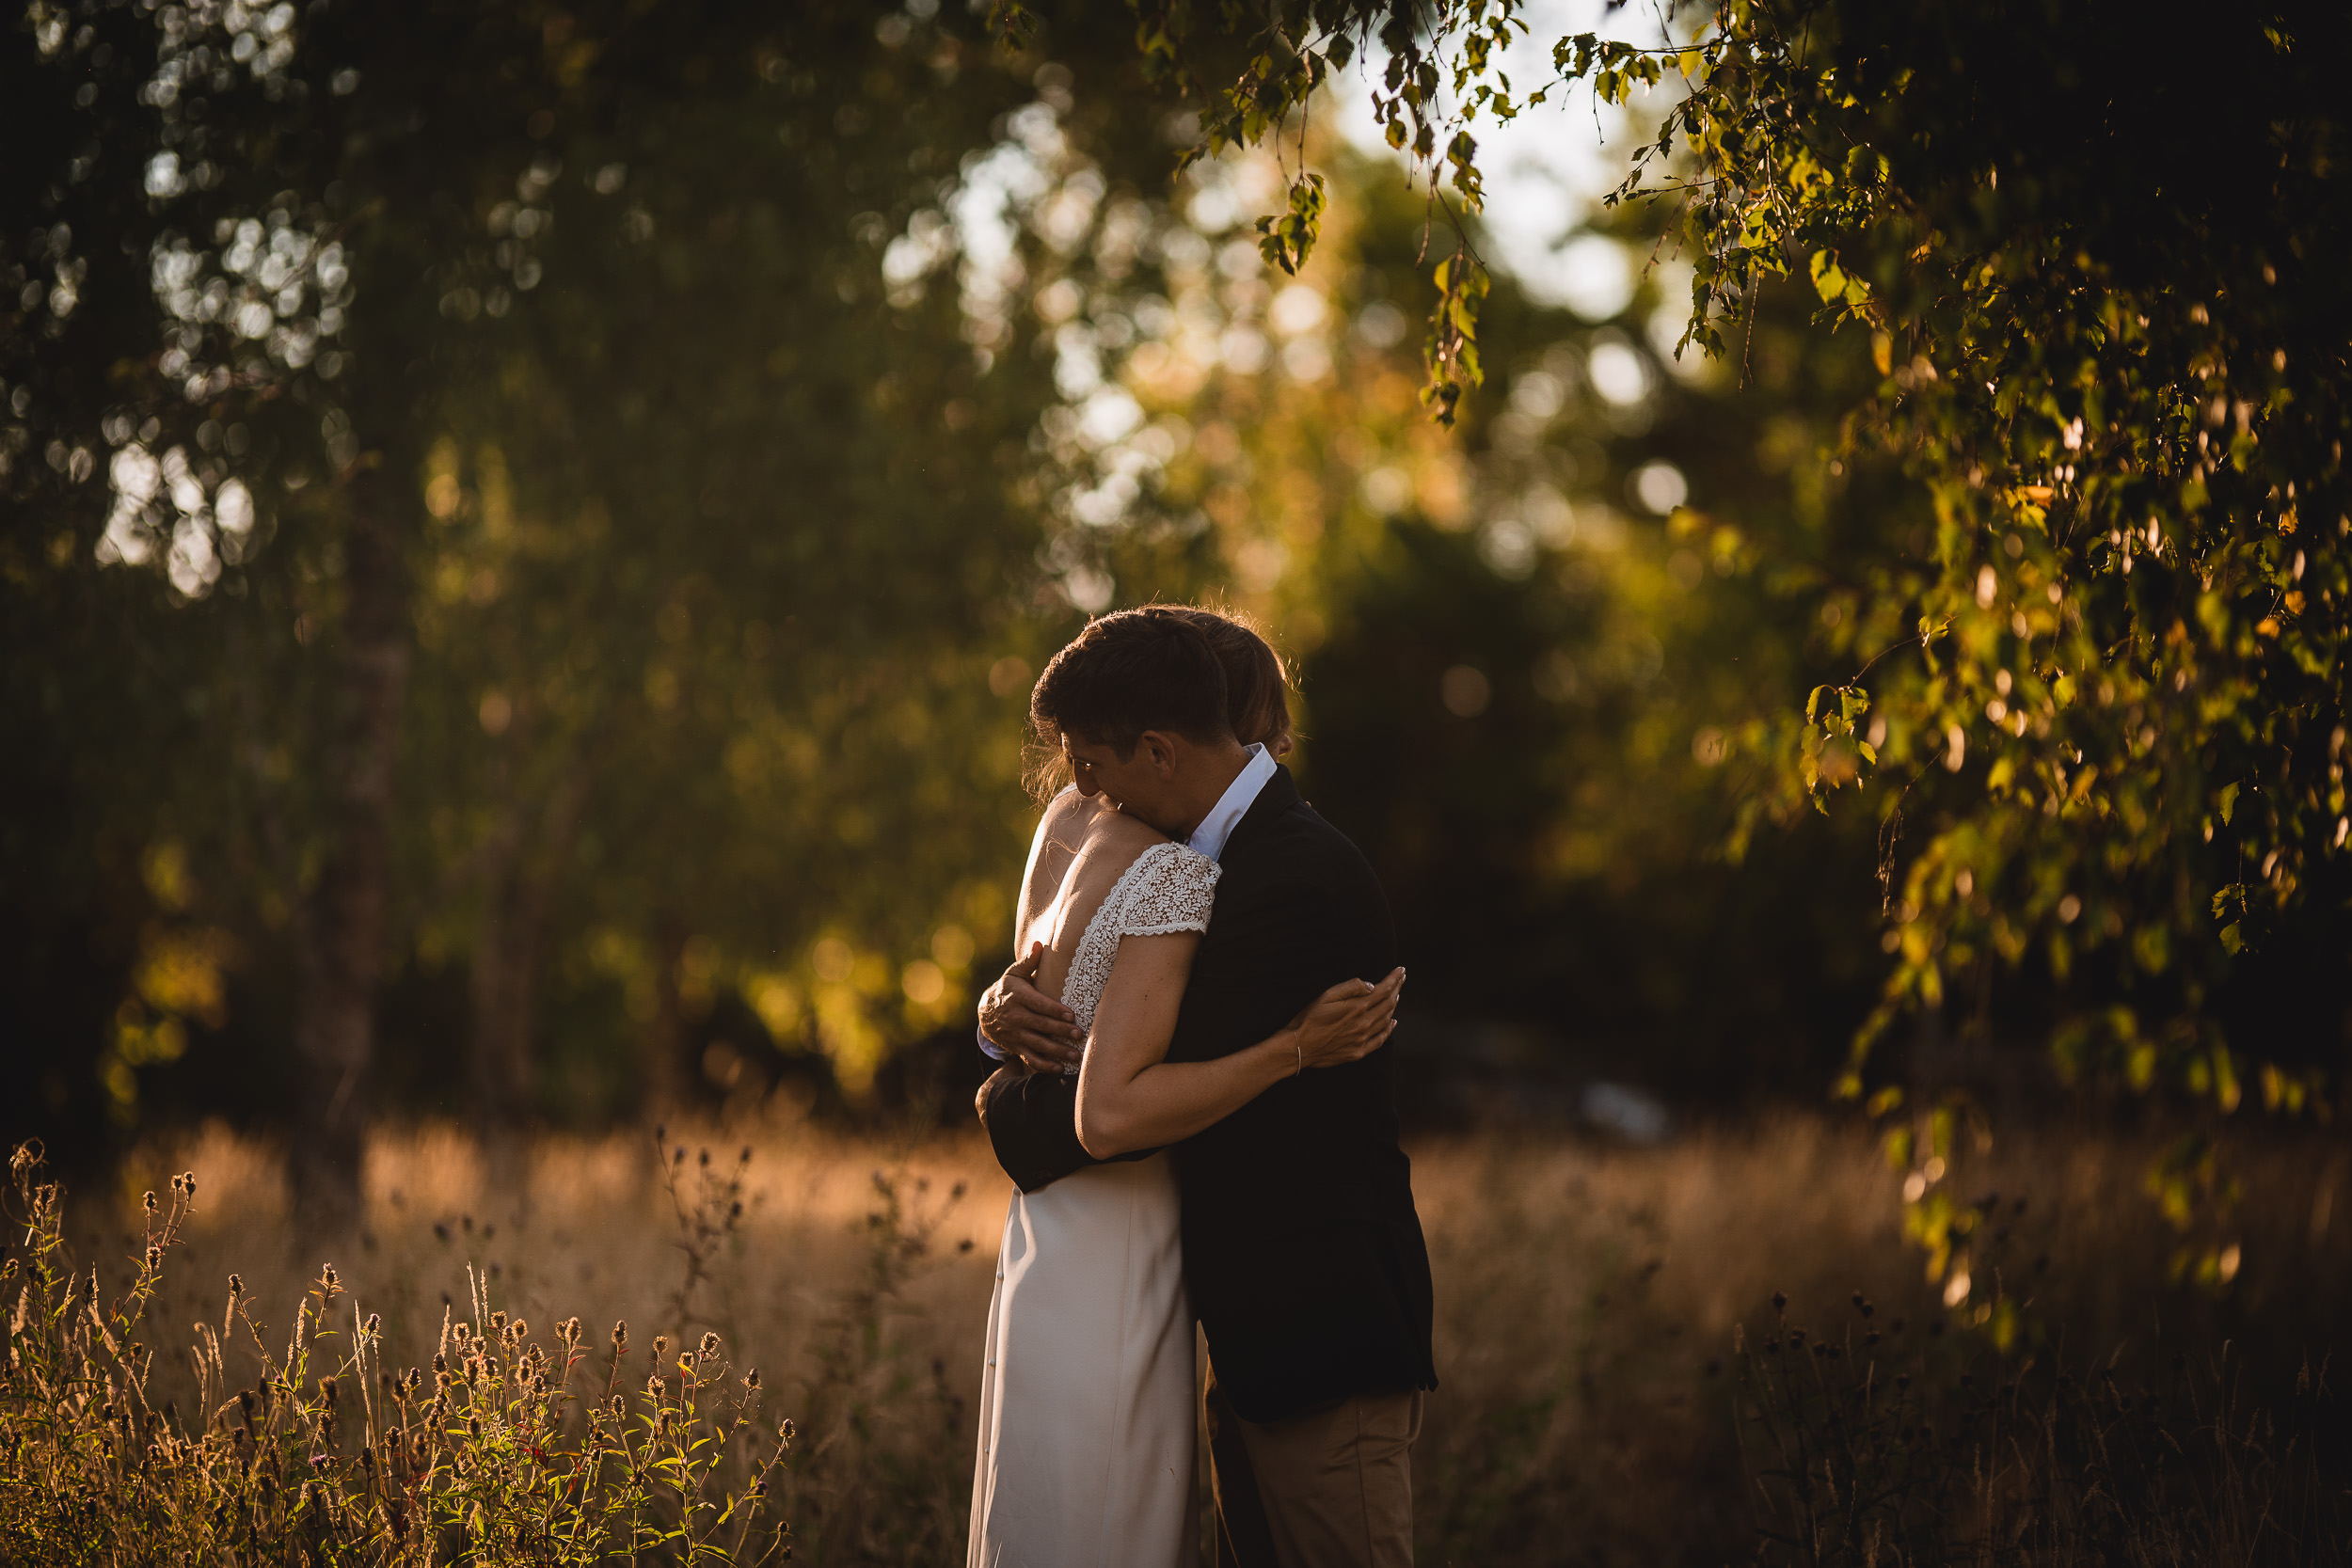 A bride and groom embracing during their sunset wedding photoshoot in a picturesque field.